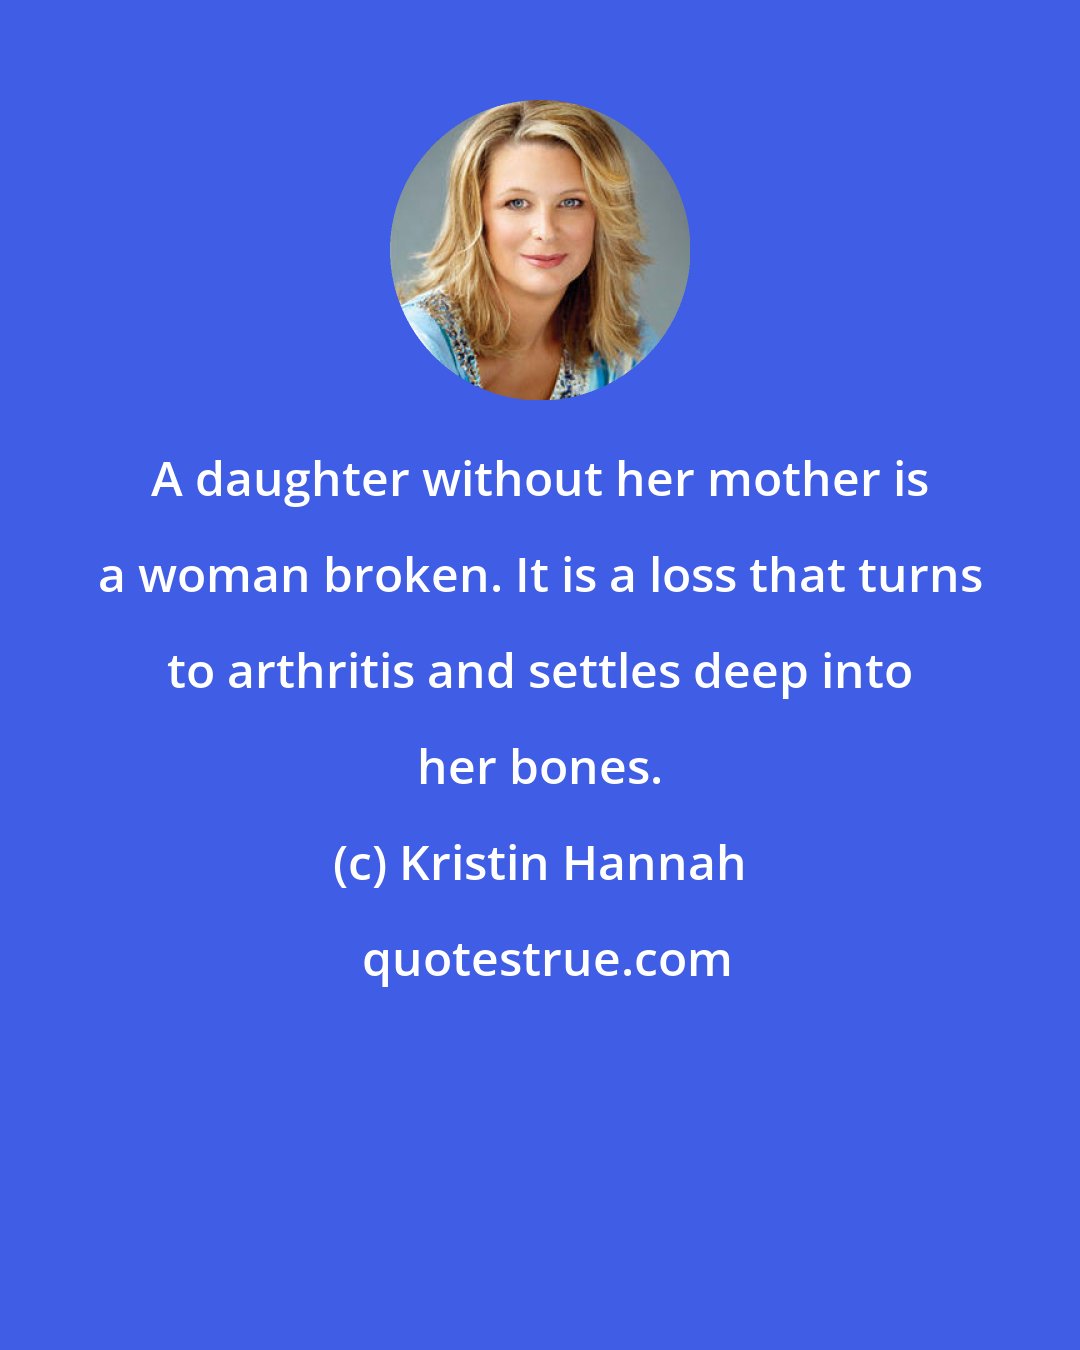 Kristin Hannah: A daughter without her mother is a woman broken. It is a loss that turns to arthritis and settles deep into her bones.